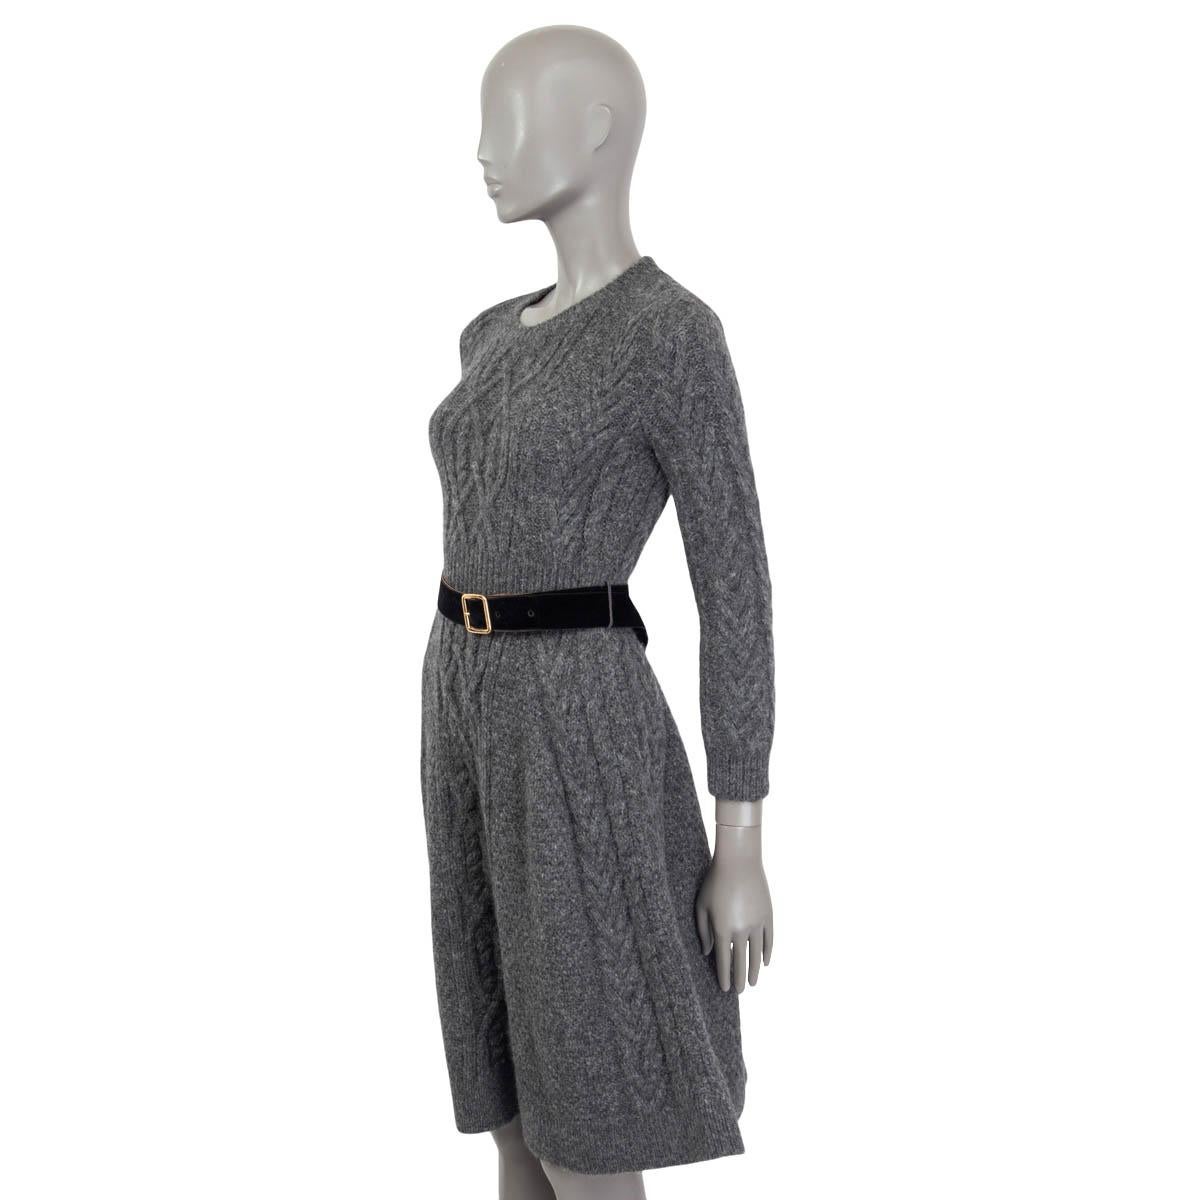 Women's LOUIS VUITTON grey alpaca BELTED CHUNKY CABLE KNIT Dress S